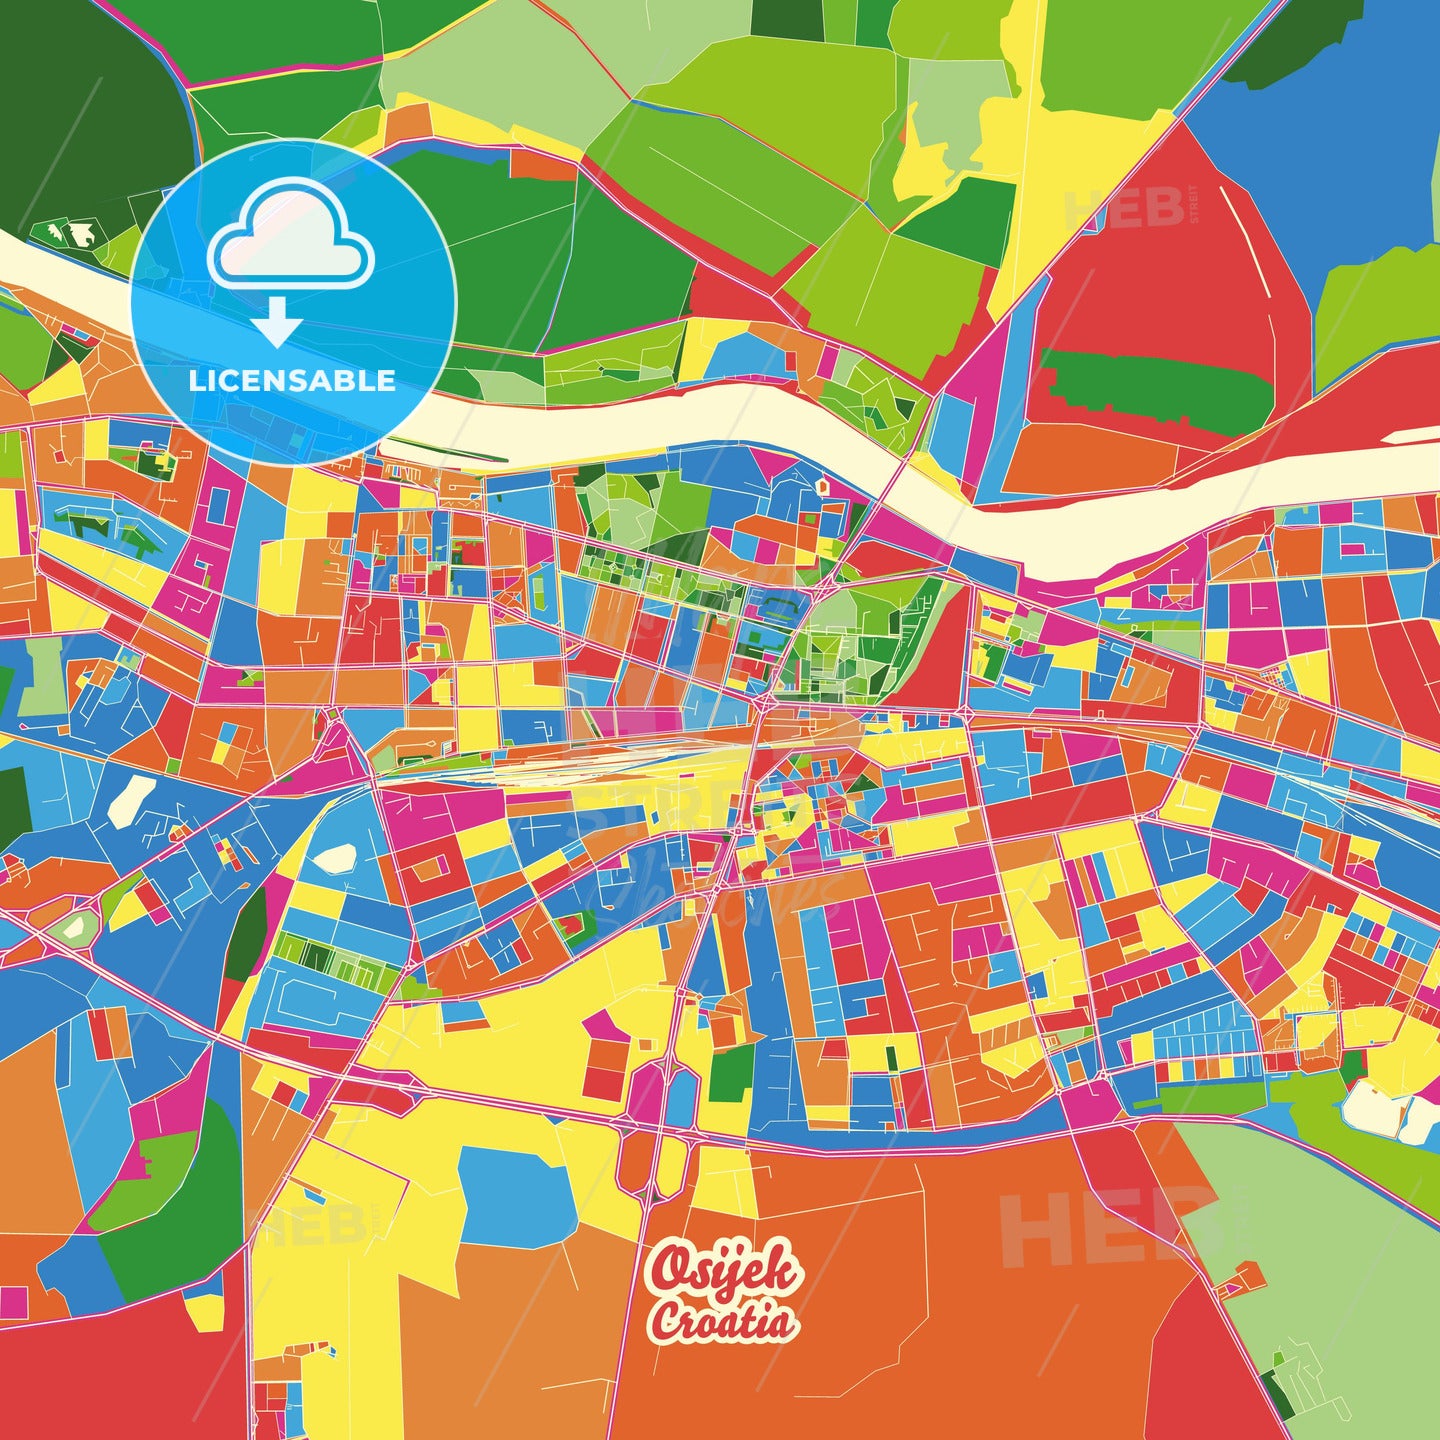 Osijek, Croatia Crazy Colorful Street Map Poster Template - HEBSTREITS Sketches